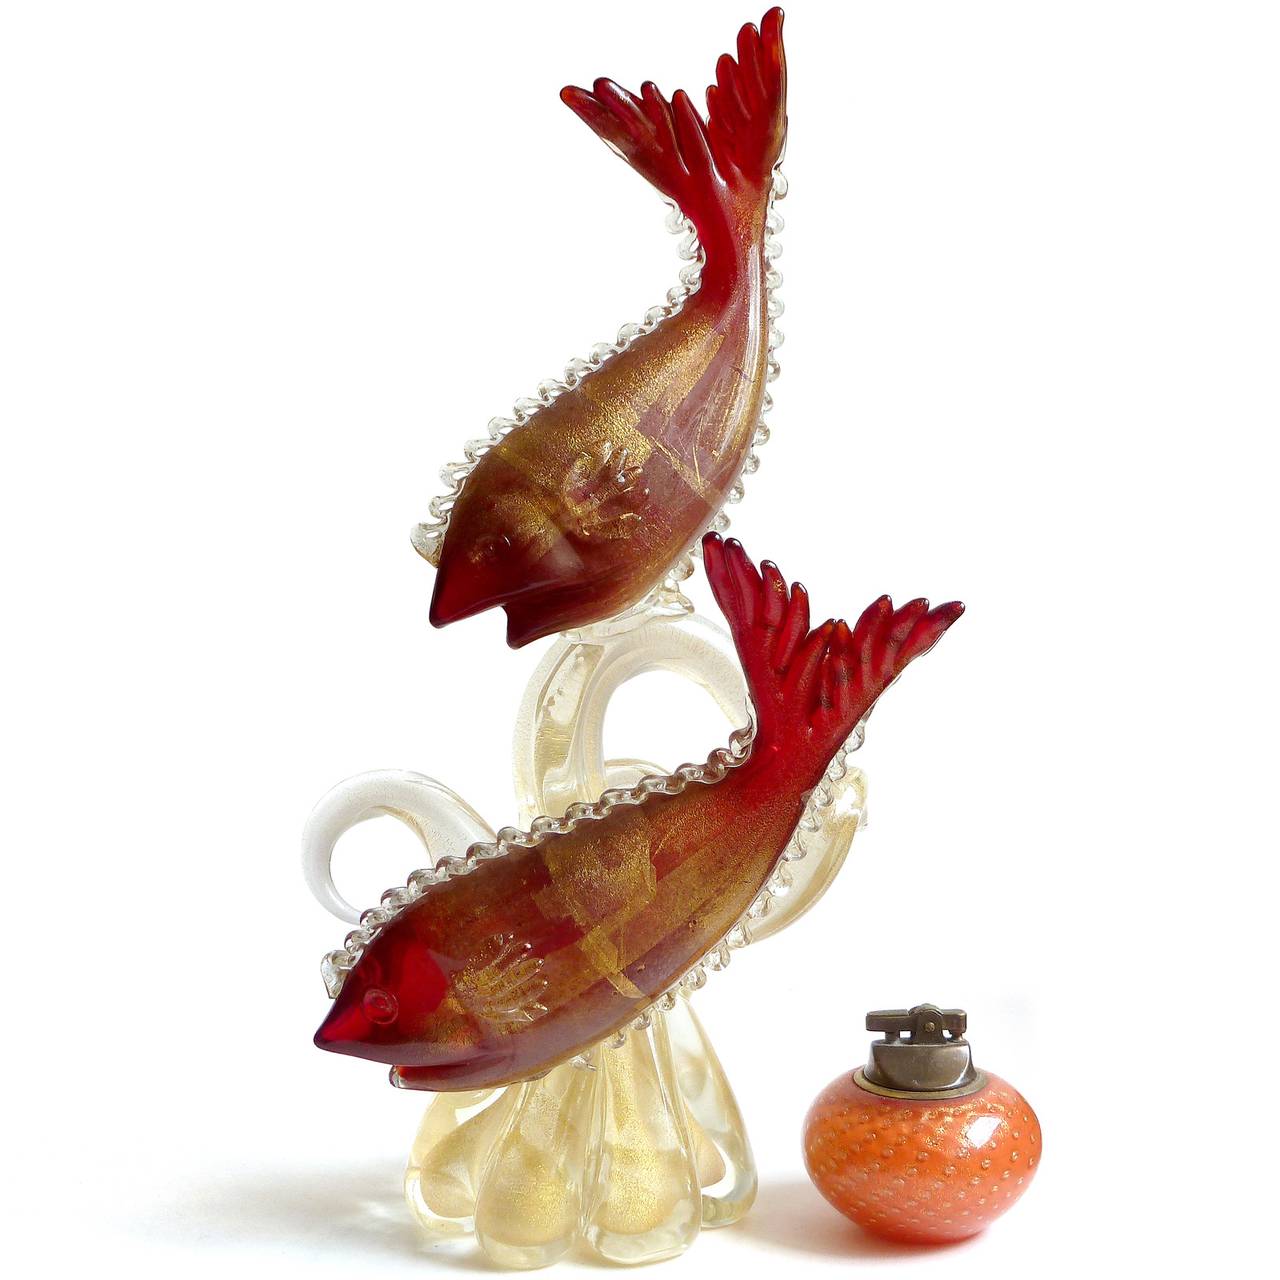 Gorgeous, vintage Murano hand blown red fish with gold flecks, attached to a large coral structure with tendrils Italian art glass sculpture. Created in the manner of designers Alfredo Barbini and Archimede Seguso. The piece has 2 very large fish